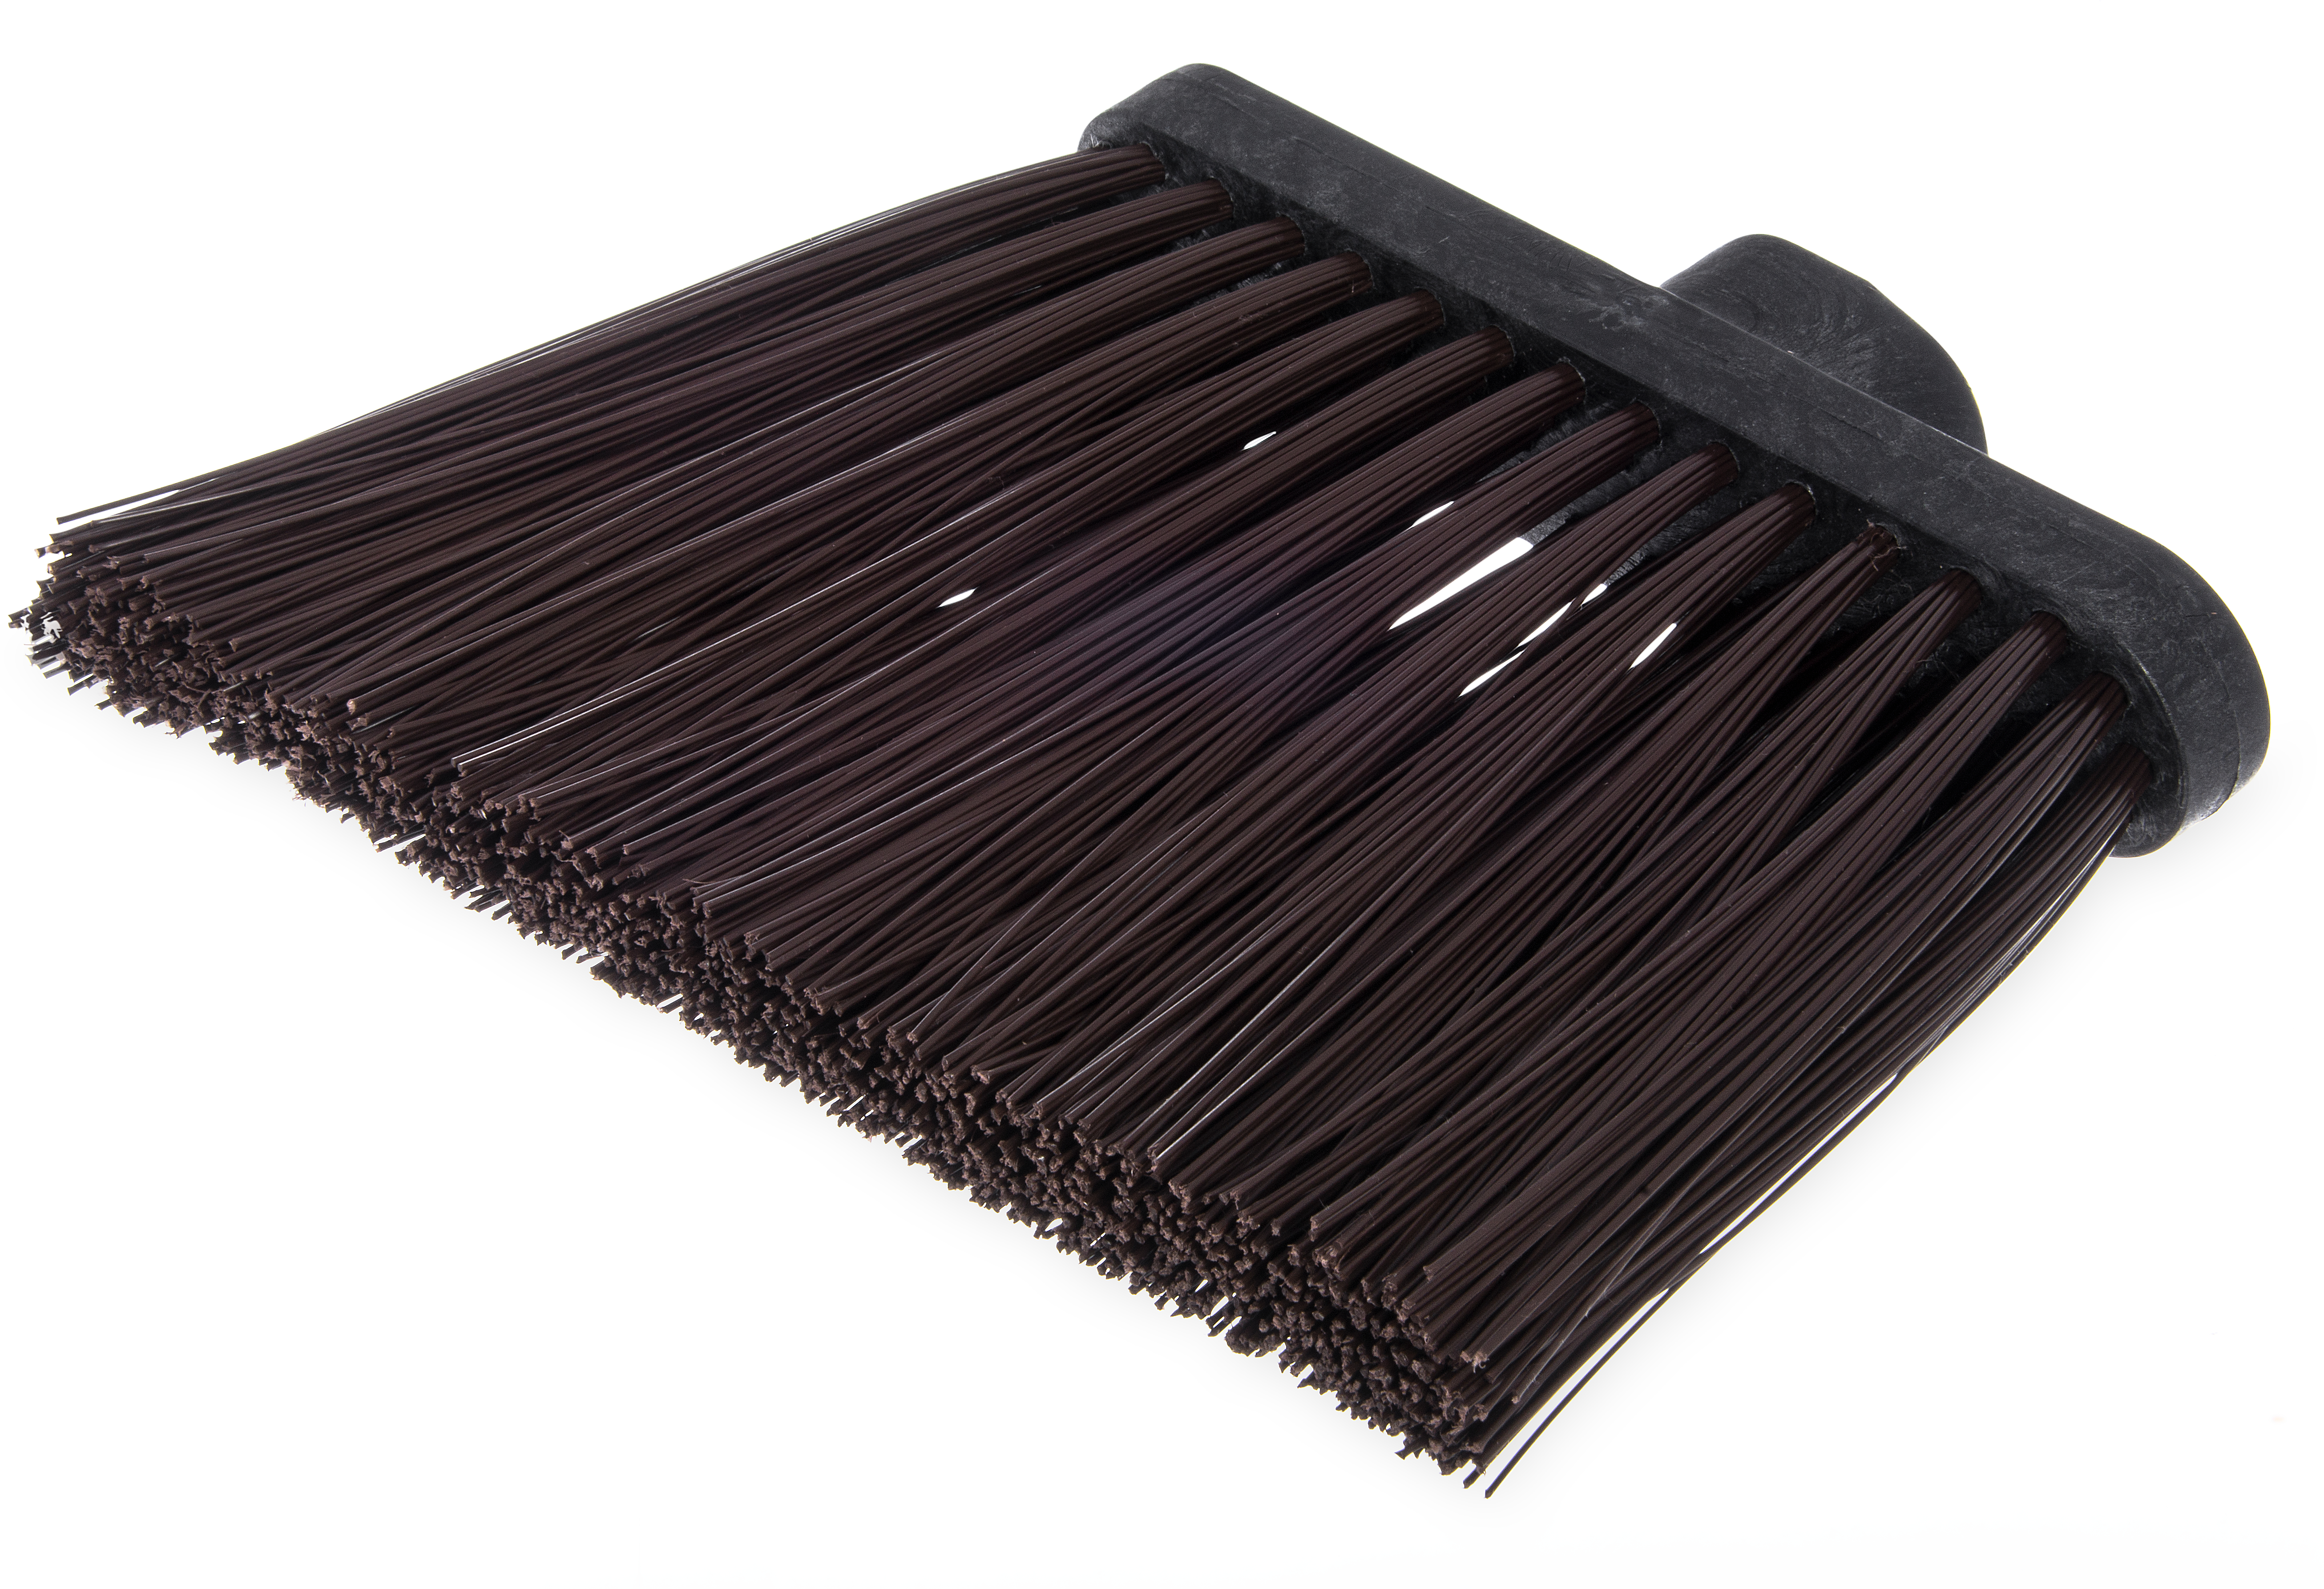 Duo-Sweep Heavy Duty Angle Broom w/12 Flare (Head Only) 8 - Brown